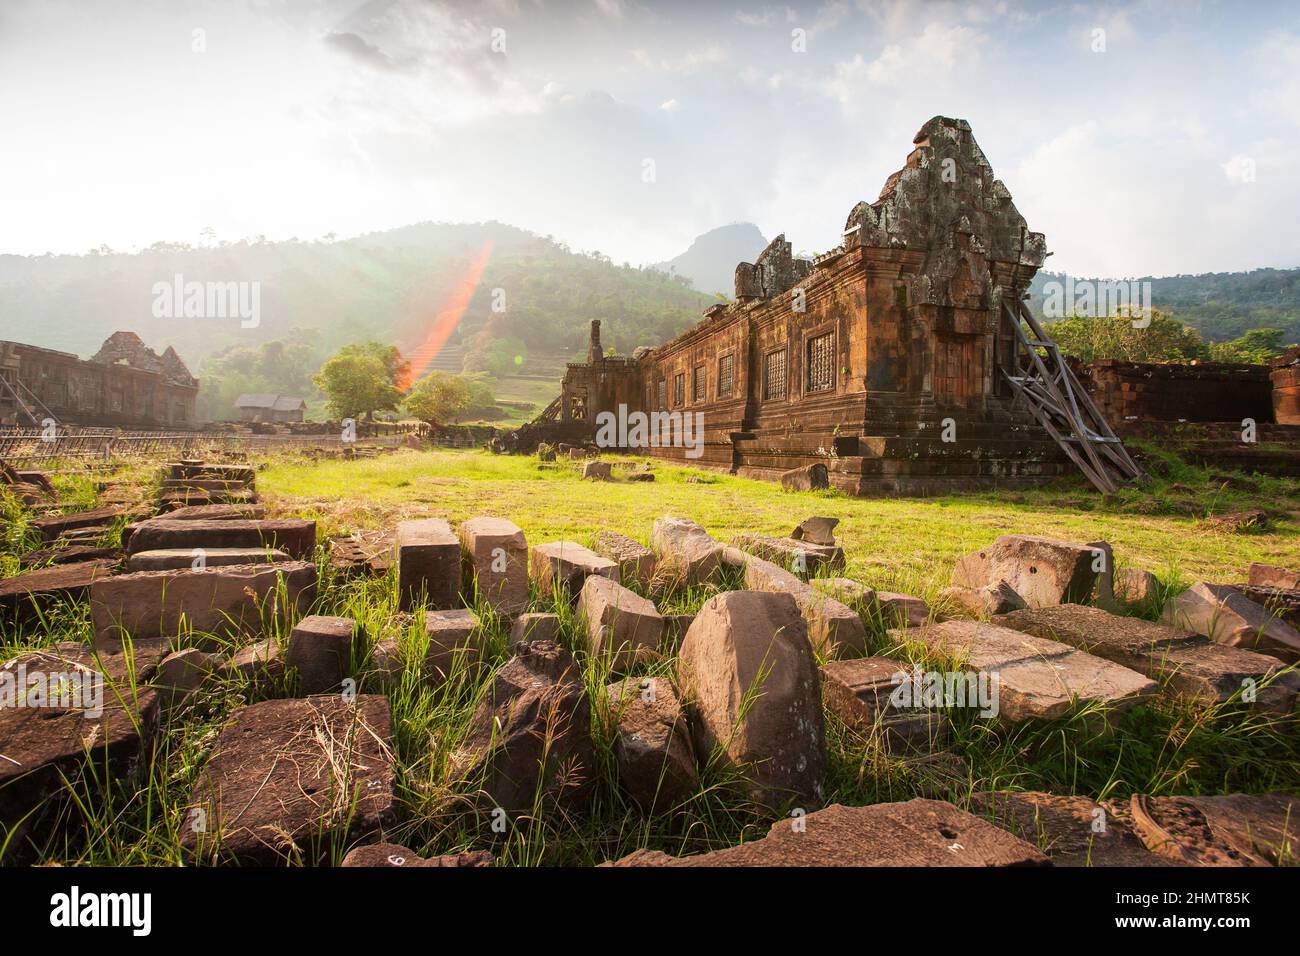 The ancient temple of Vat Phou, Laos. Vat Phou was a part of the Khmer Empire centered on Angkor to the southwest. UNESCO The World Heritage Site. Stock Photo